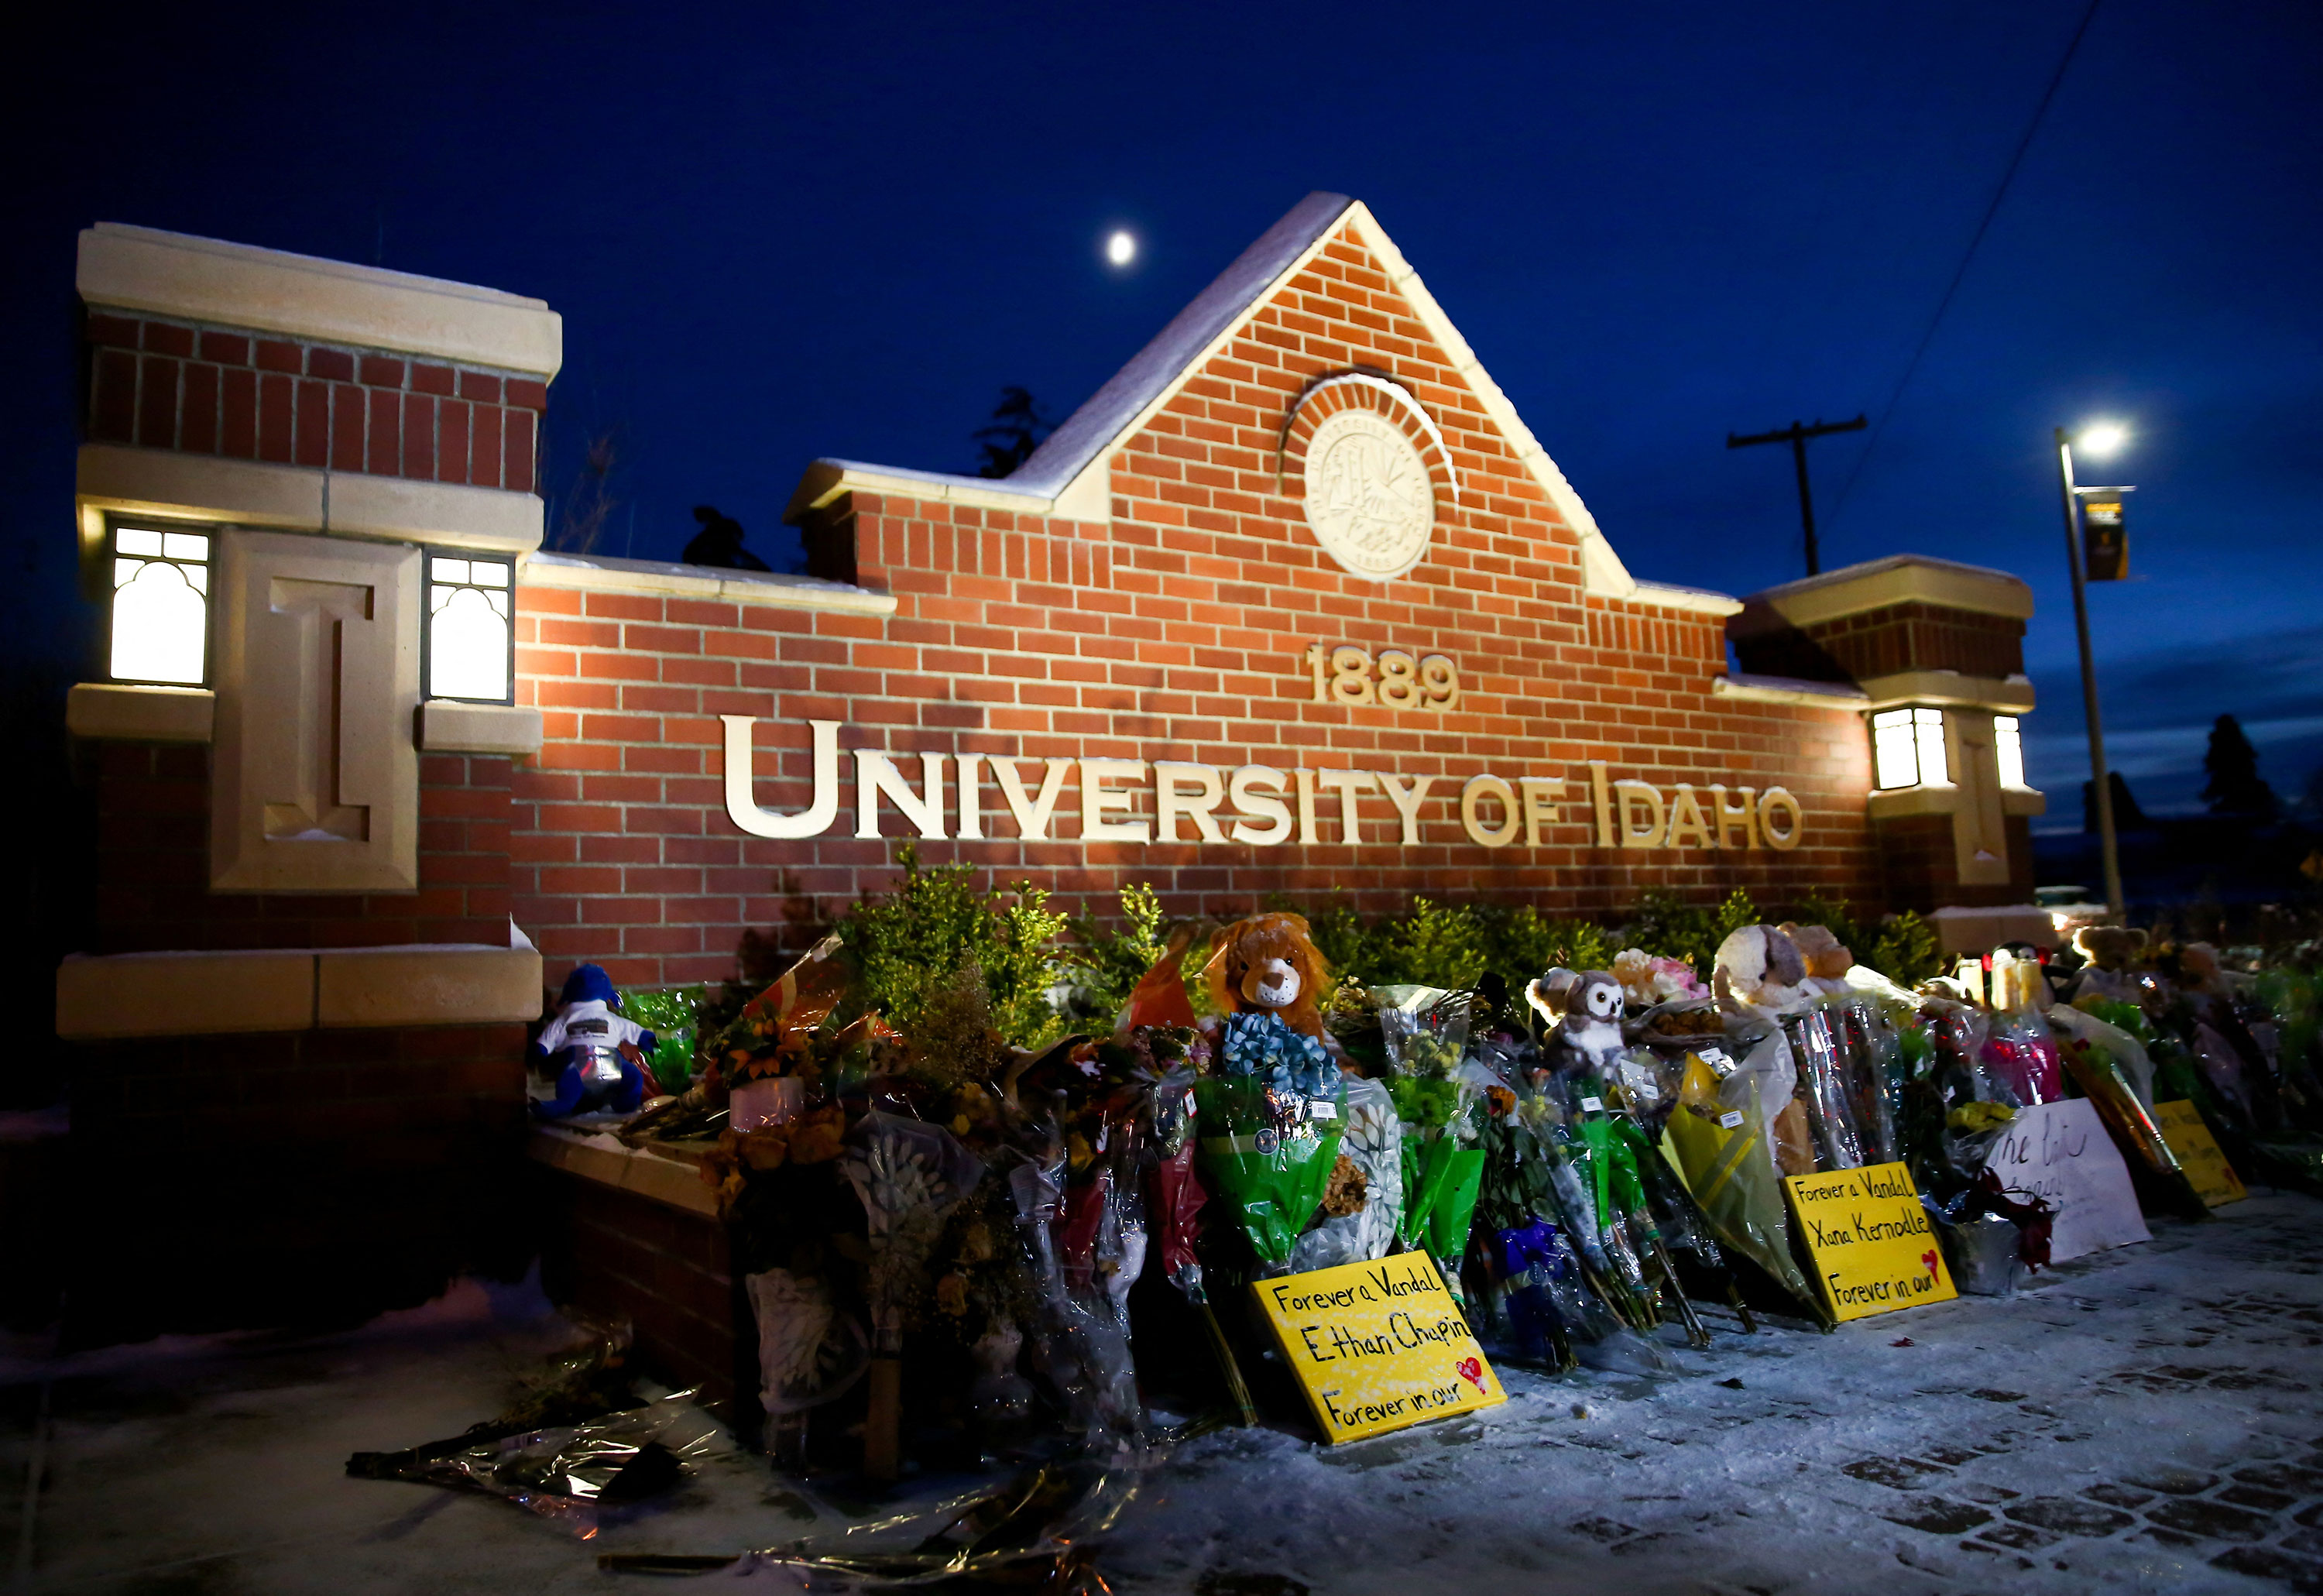 A memorial is seen in front of a sign on the University of Idaho campus in Moscow, Idaho, on Nov.